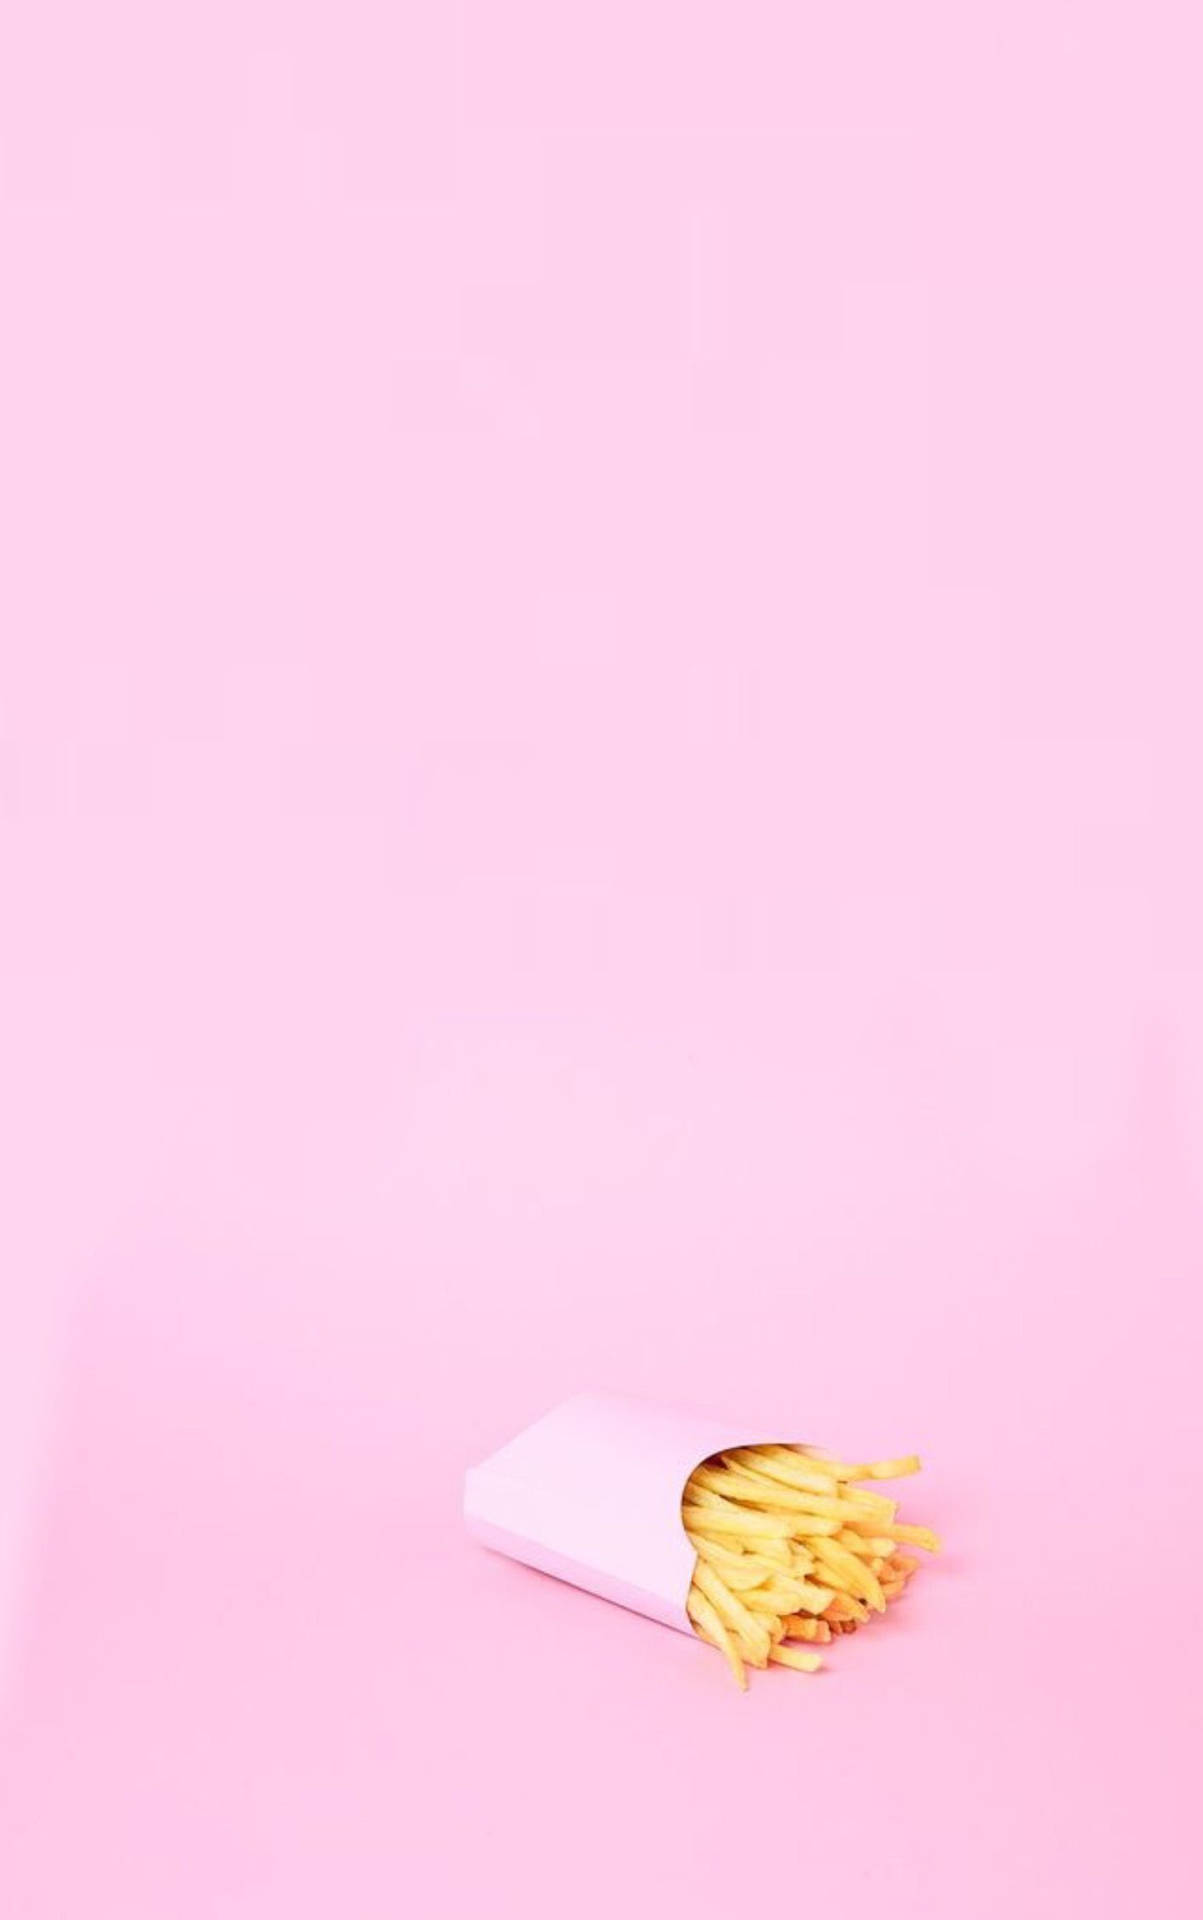 French Fries Plain Pink